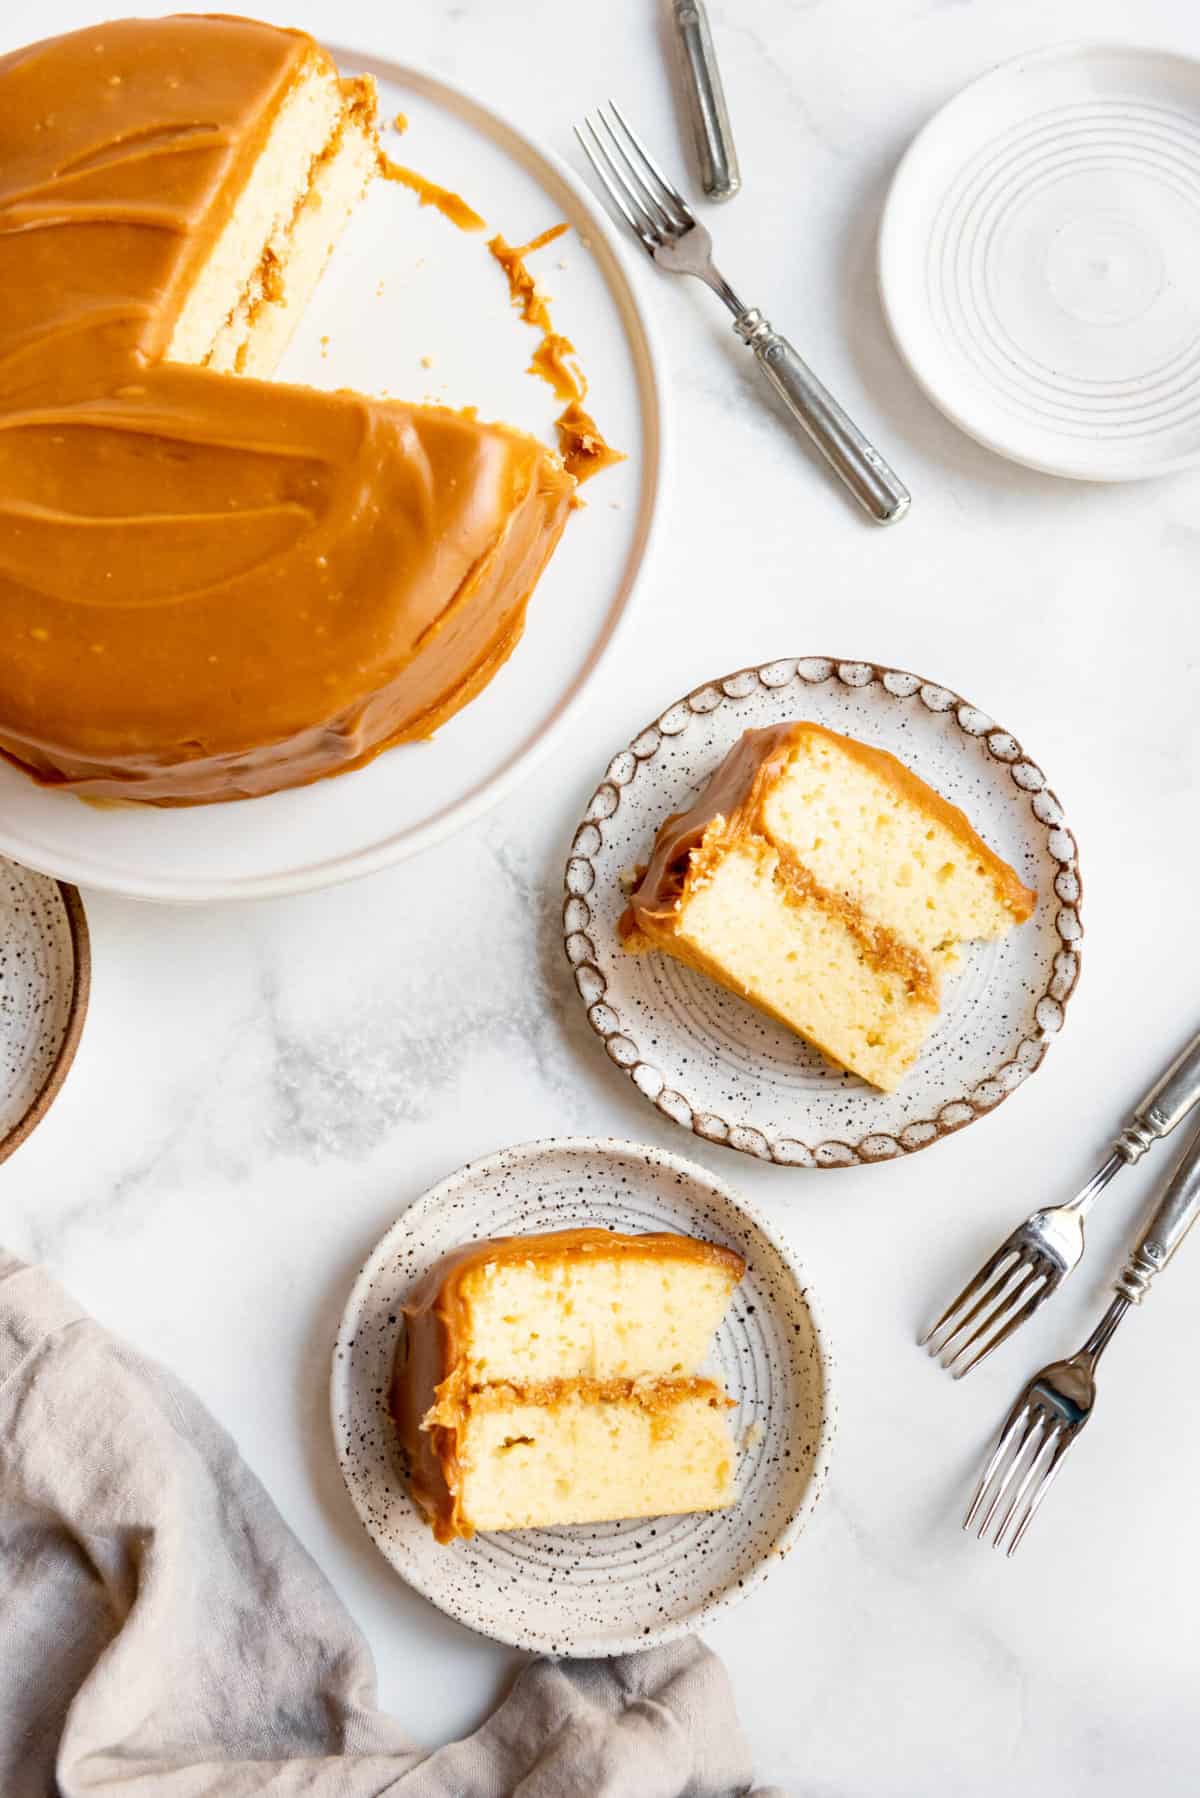 Slices of homemade caramel cake on plates next to the rest of the cake on a cake stand.